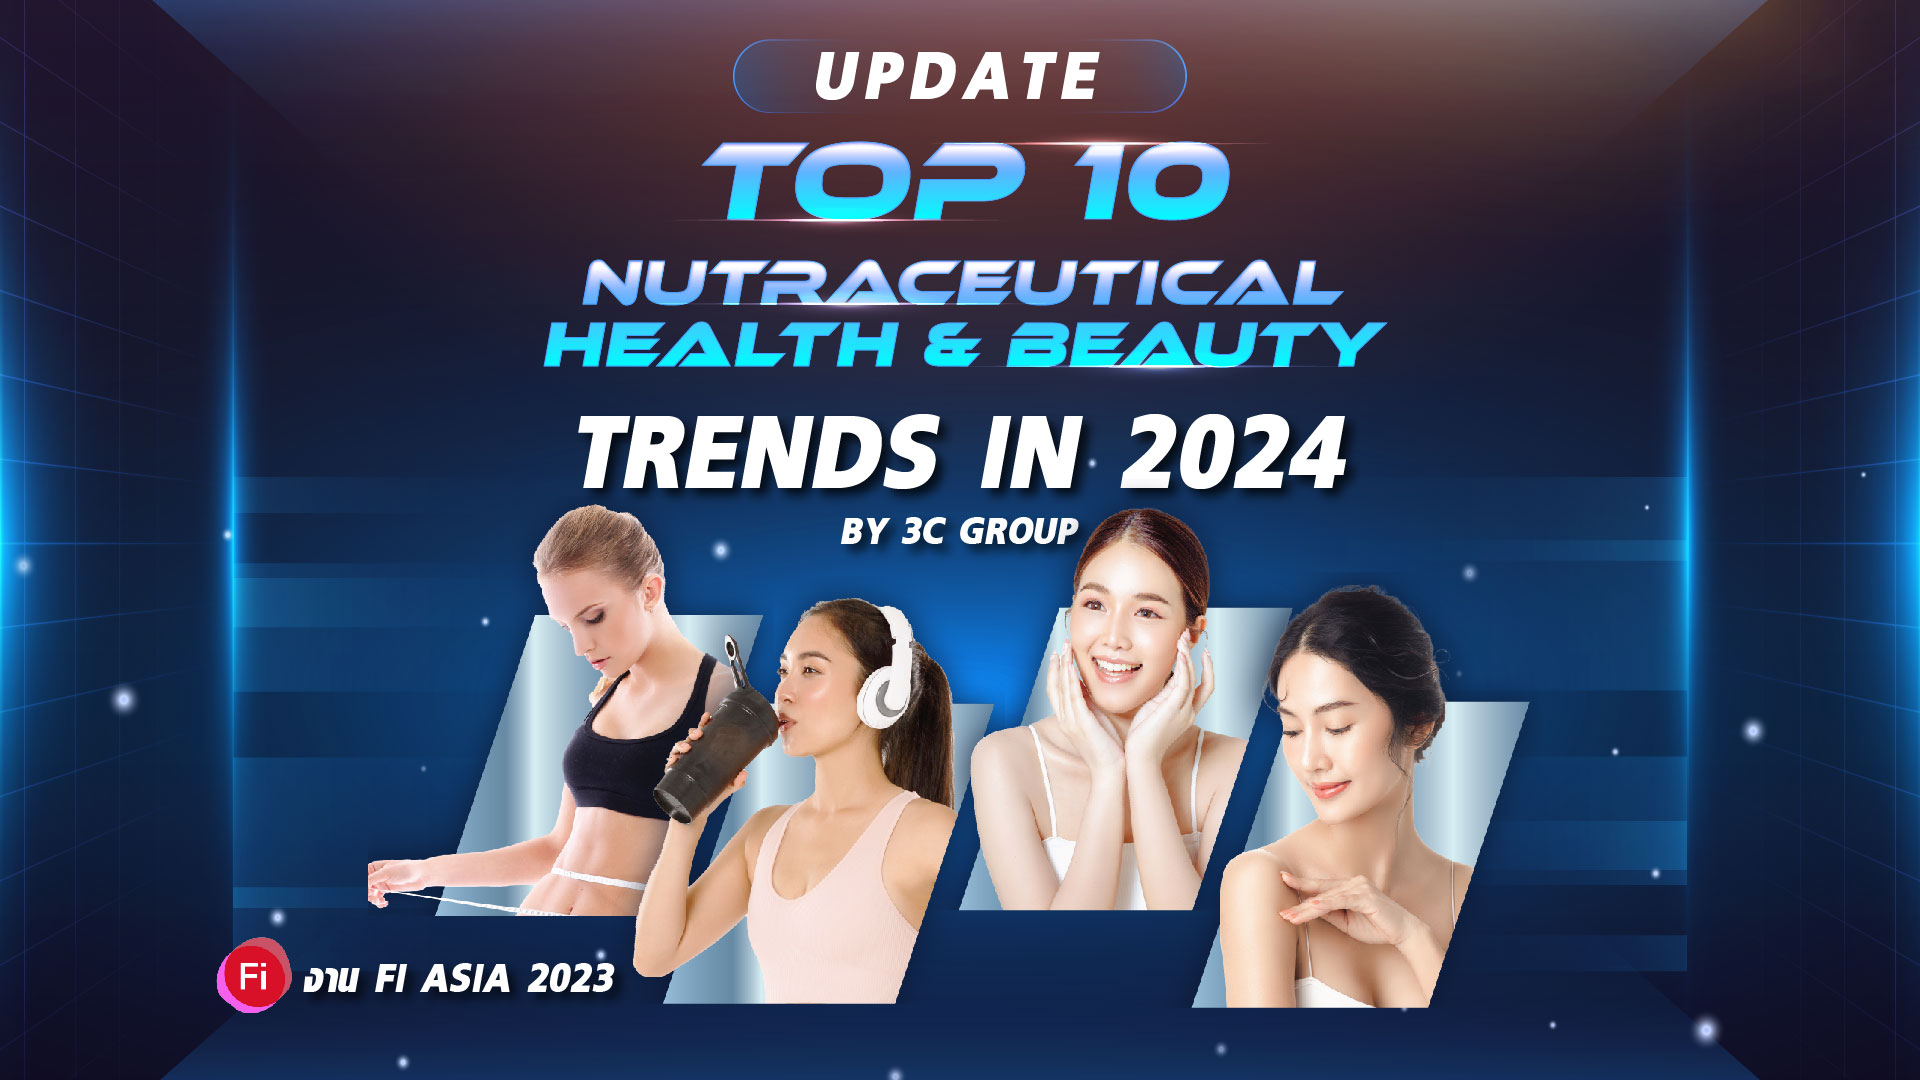 Update Top 10 Nutraceutical Health & Beauty trends in 2024" by 3C Group